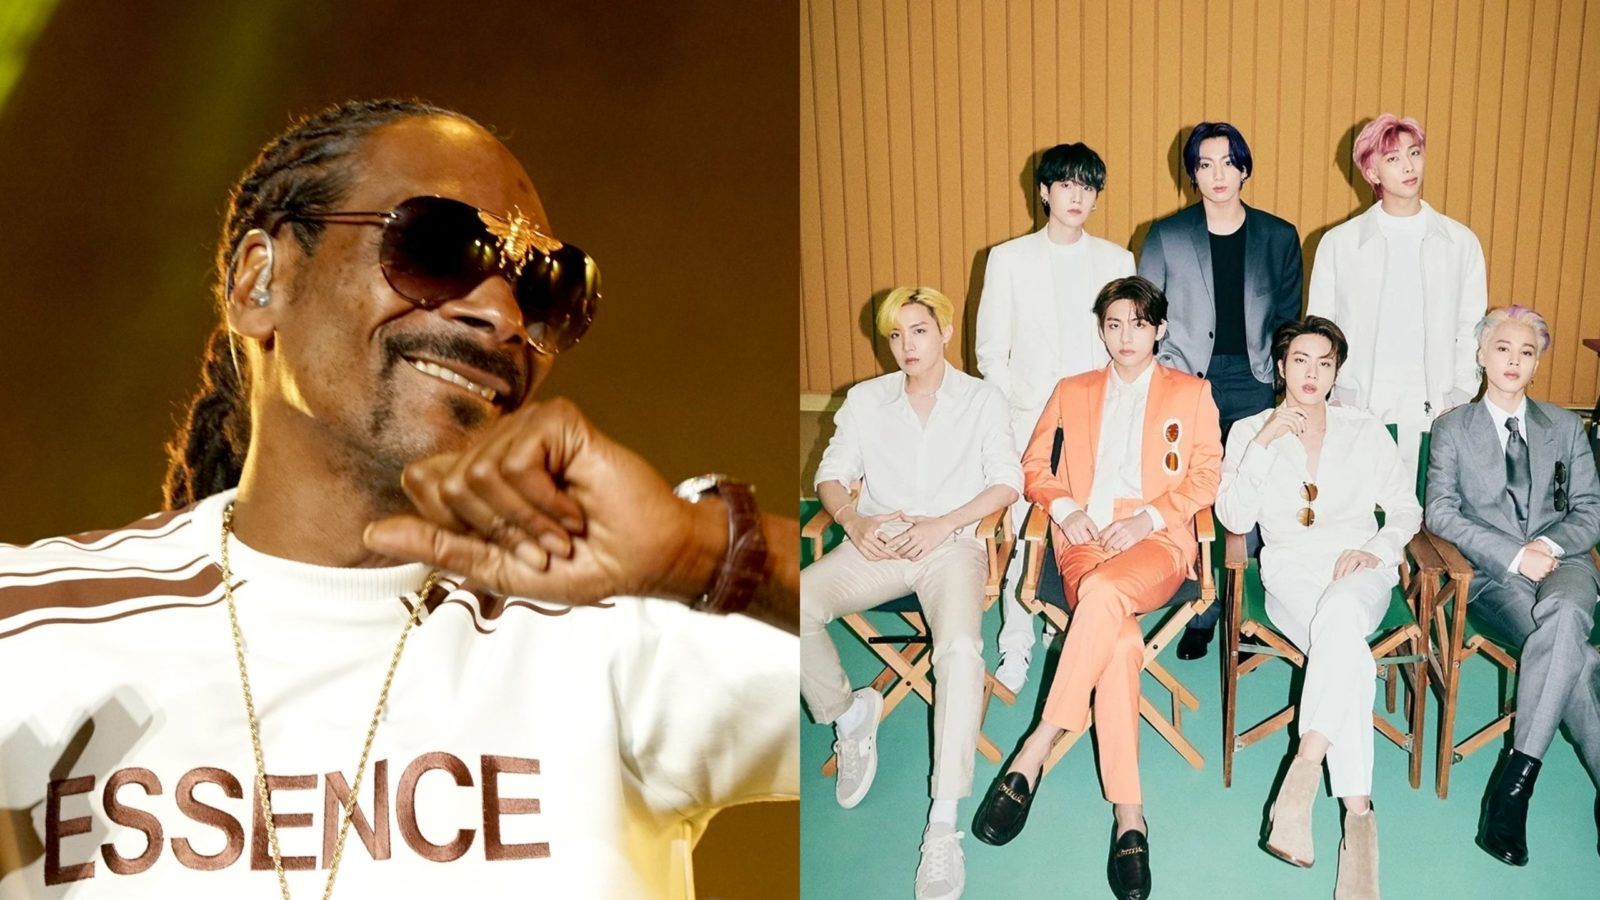 K-pop boy band BTS is working on a new song with Snoop Dogg